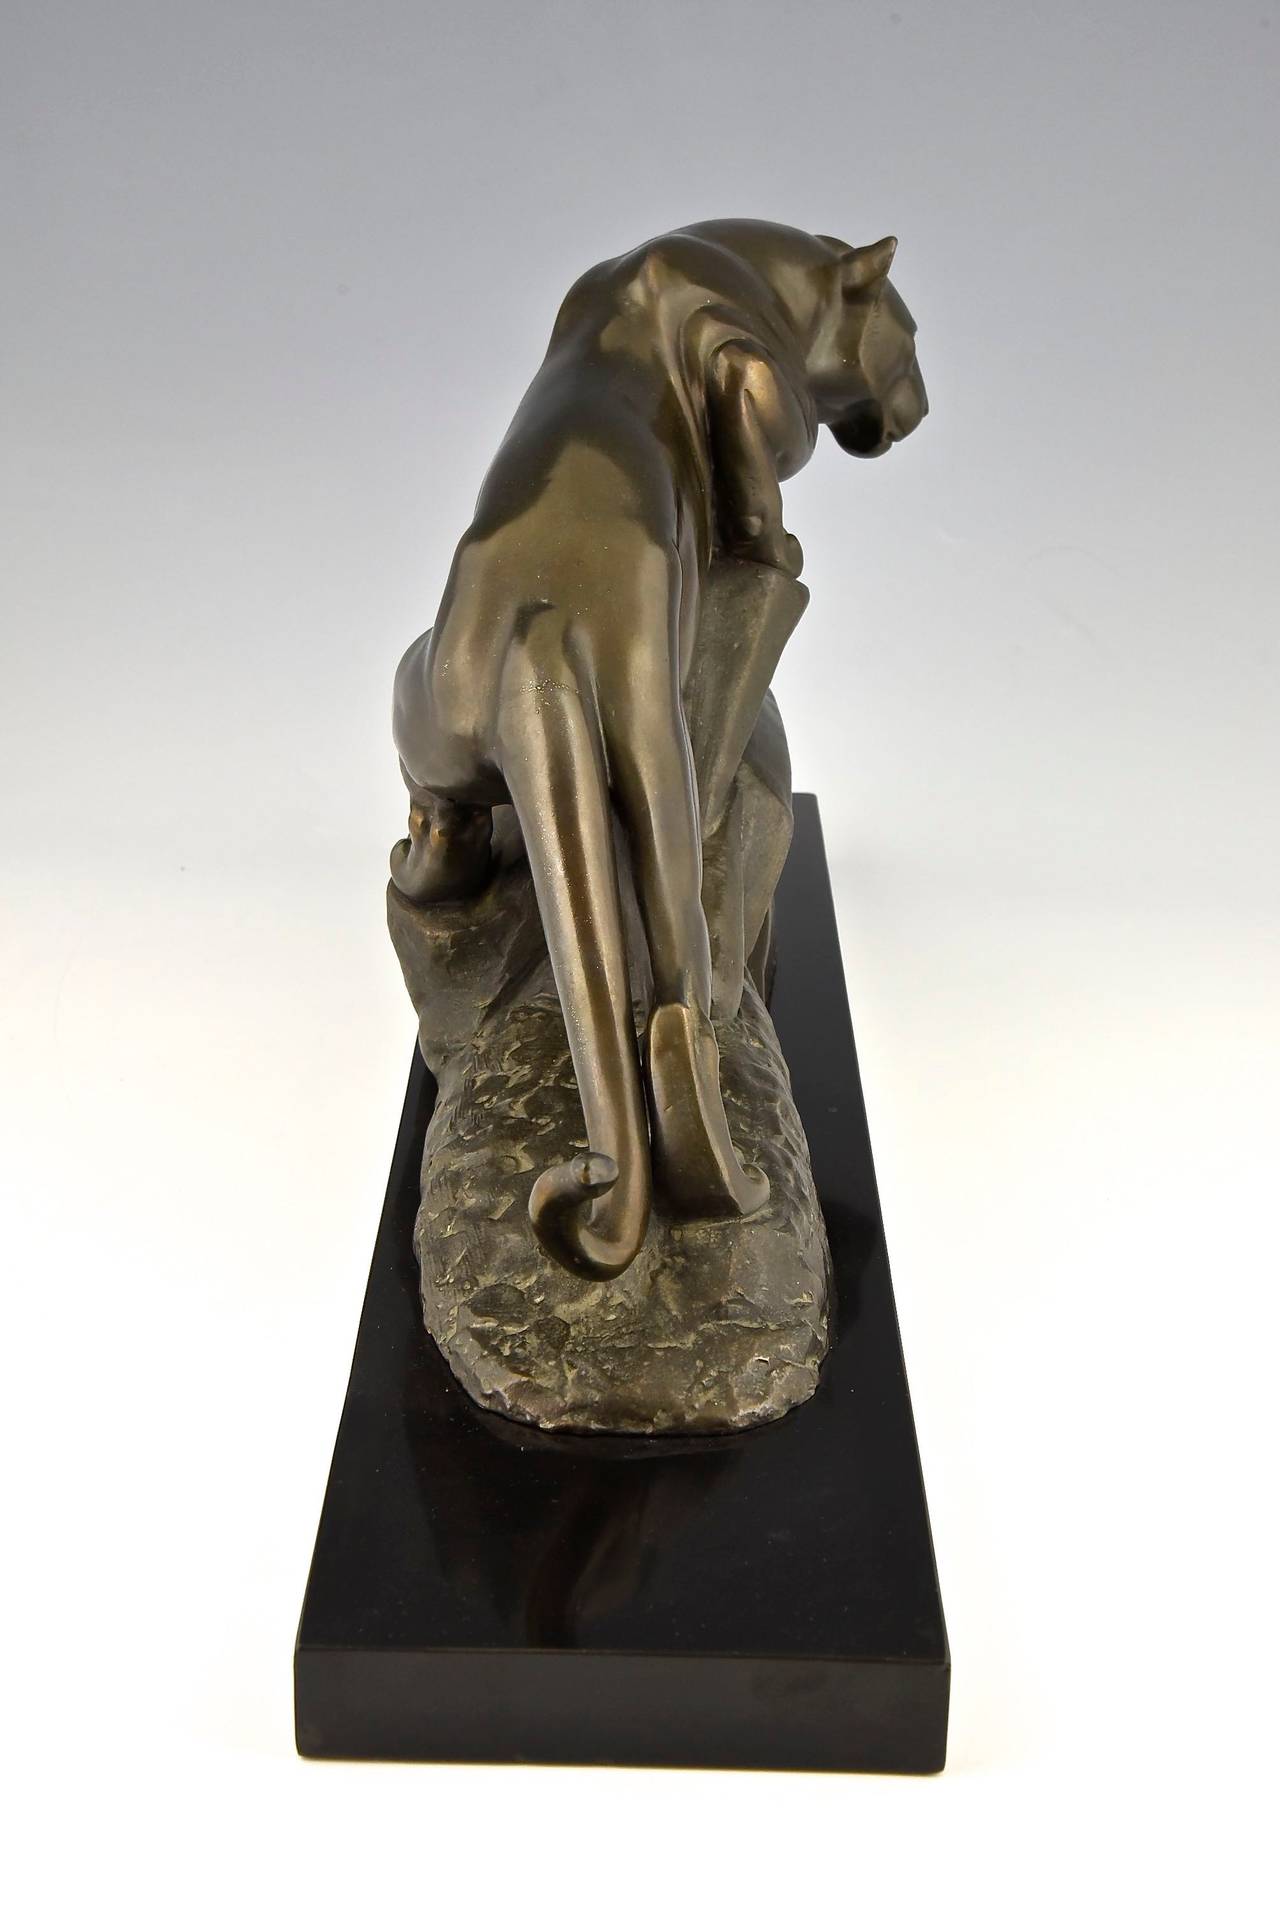 Patinated Art Deco Sculpture of a Panther by M. Leducq, France, 1935